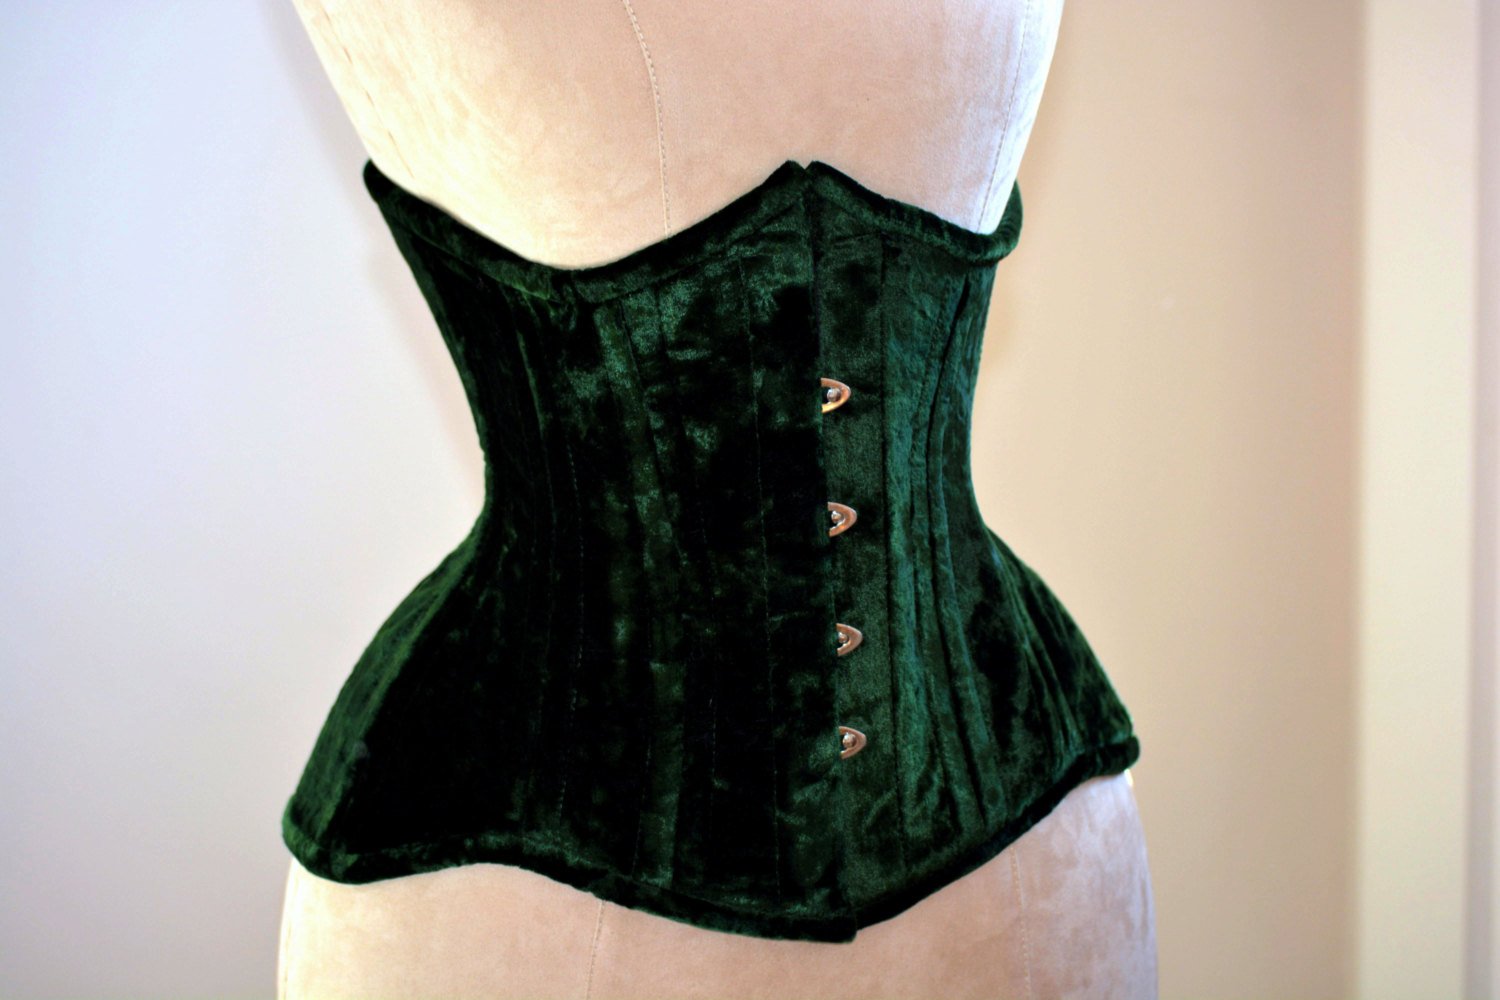 Real double row steel boned underbust corset from cotton. Waist training  fitness edition